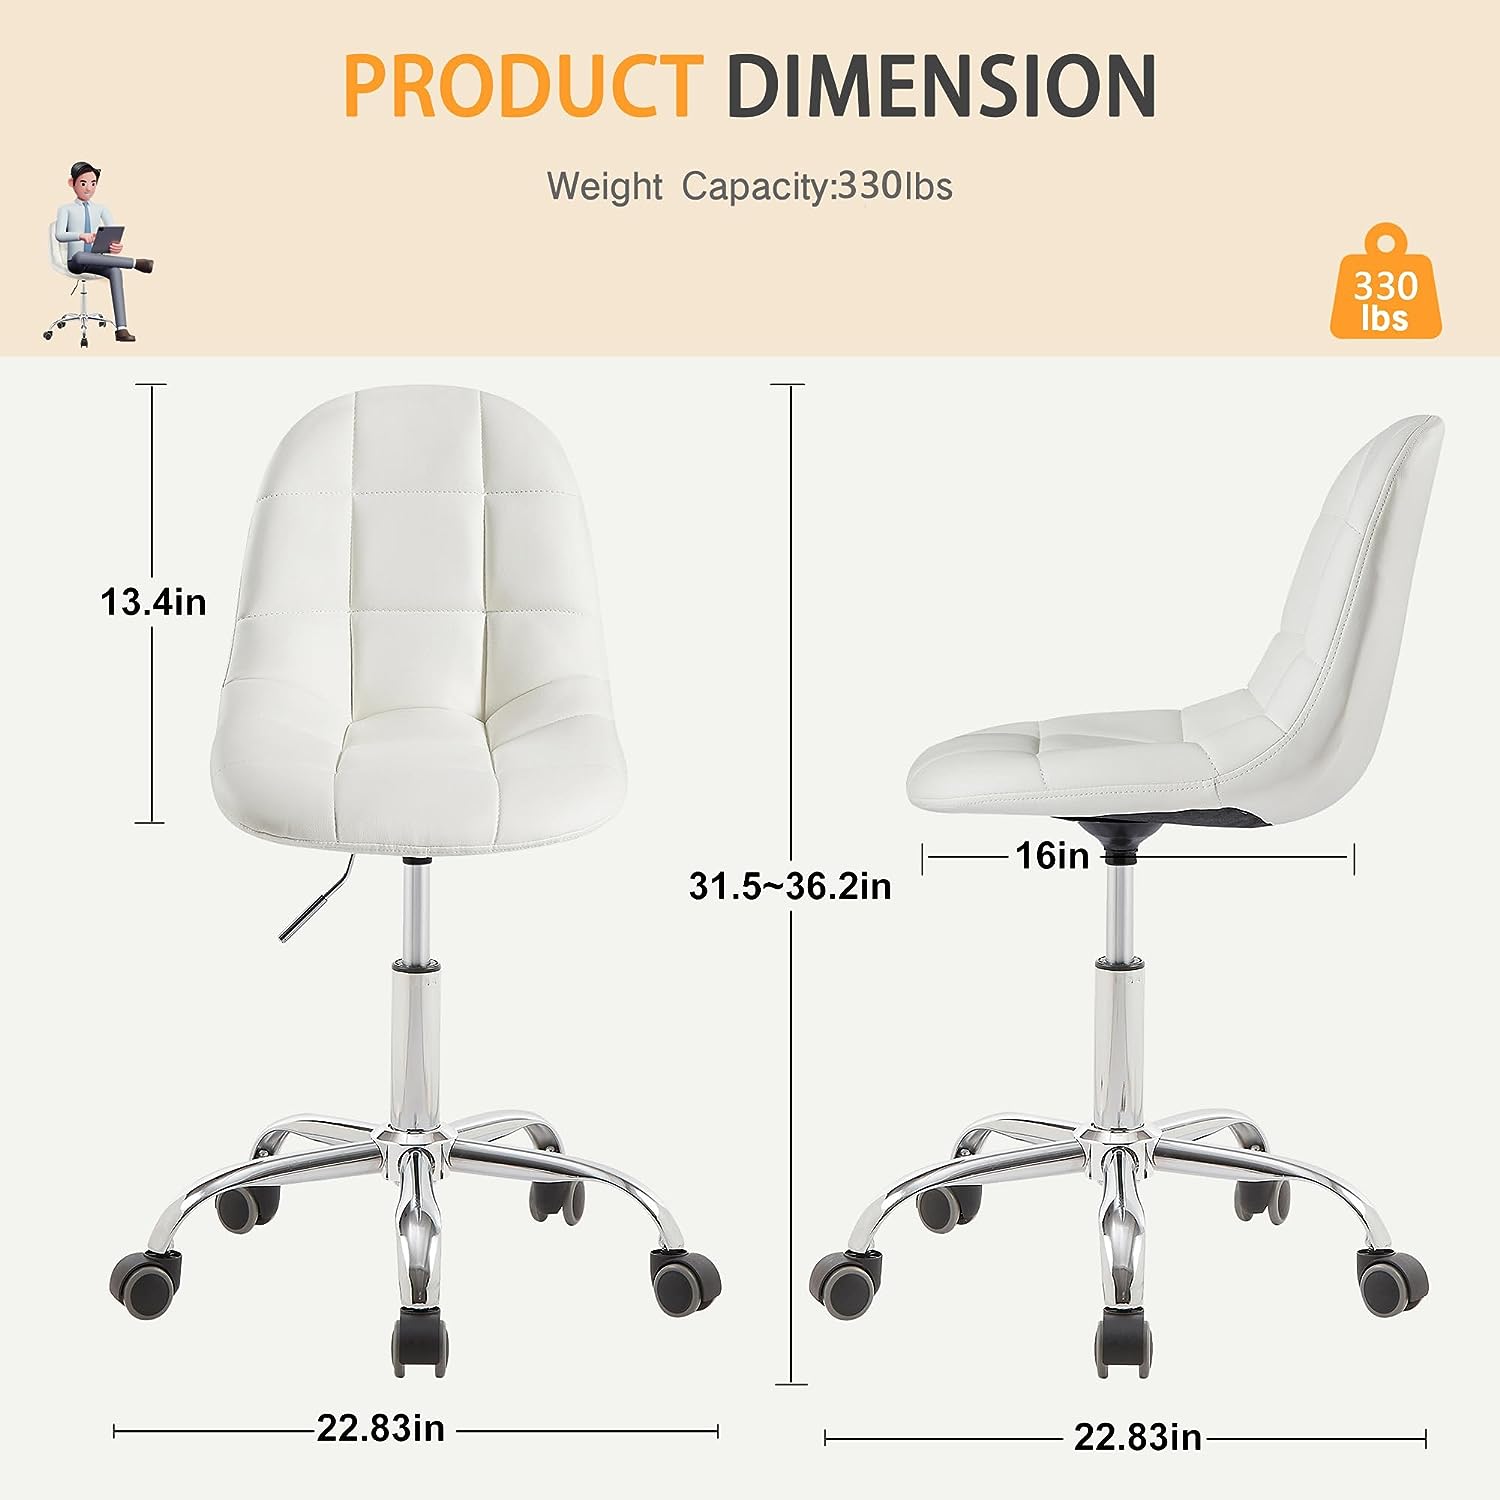 VECELO Modern Armless Home Office Desk Chair, Height Adjustable, PU Leather 360 Degree Swivel with Wheels